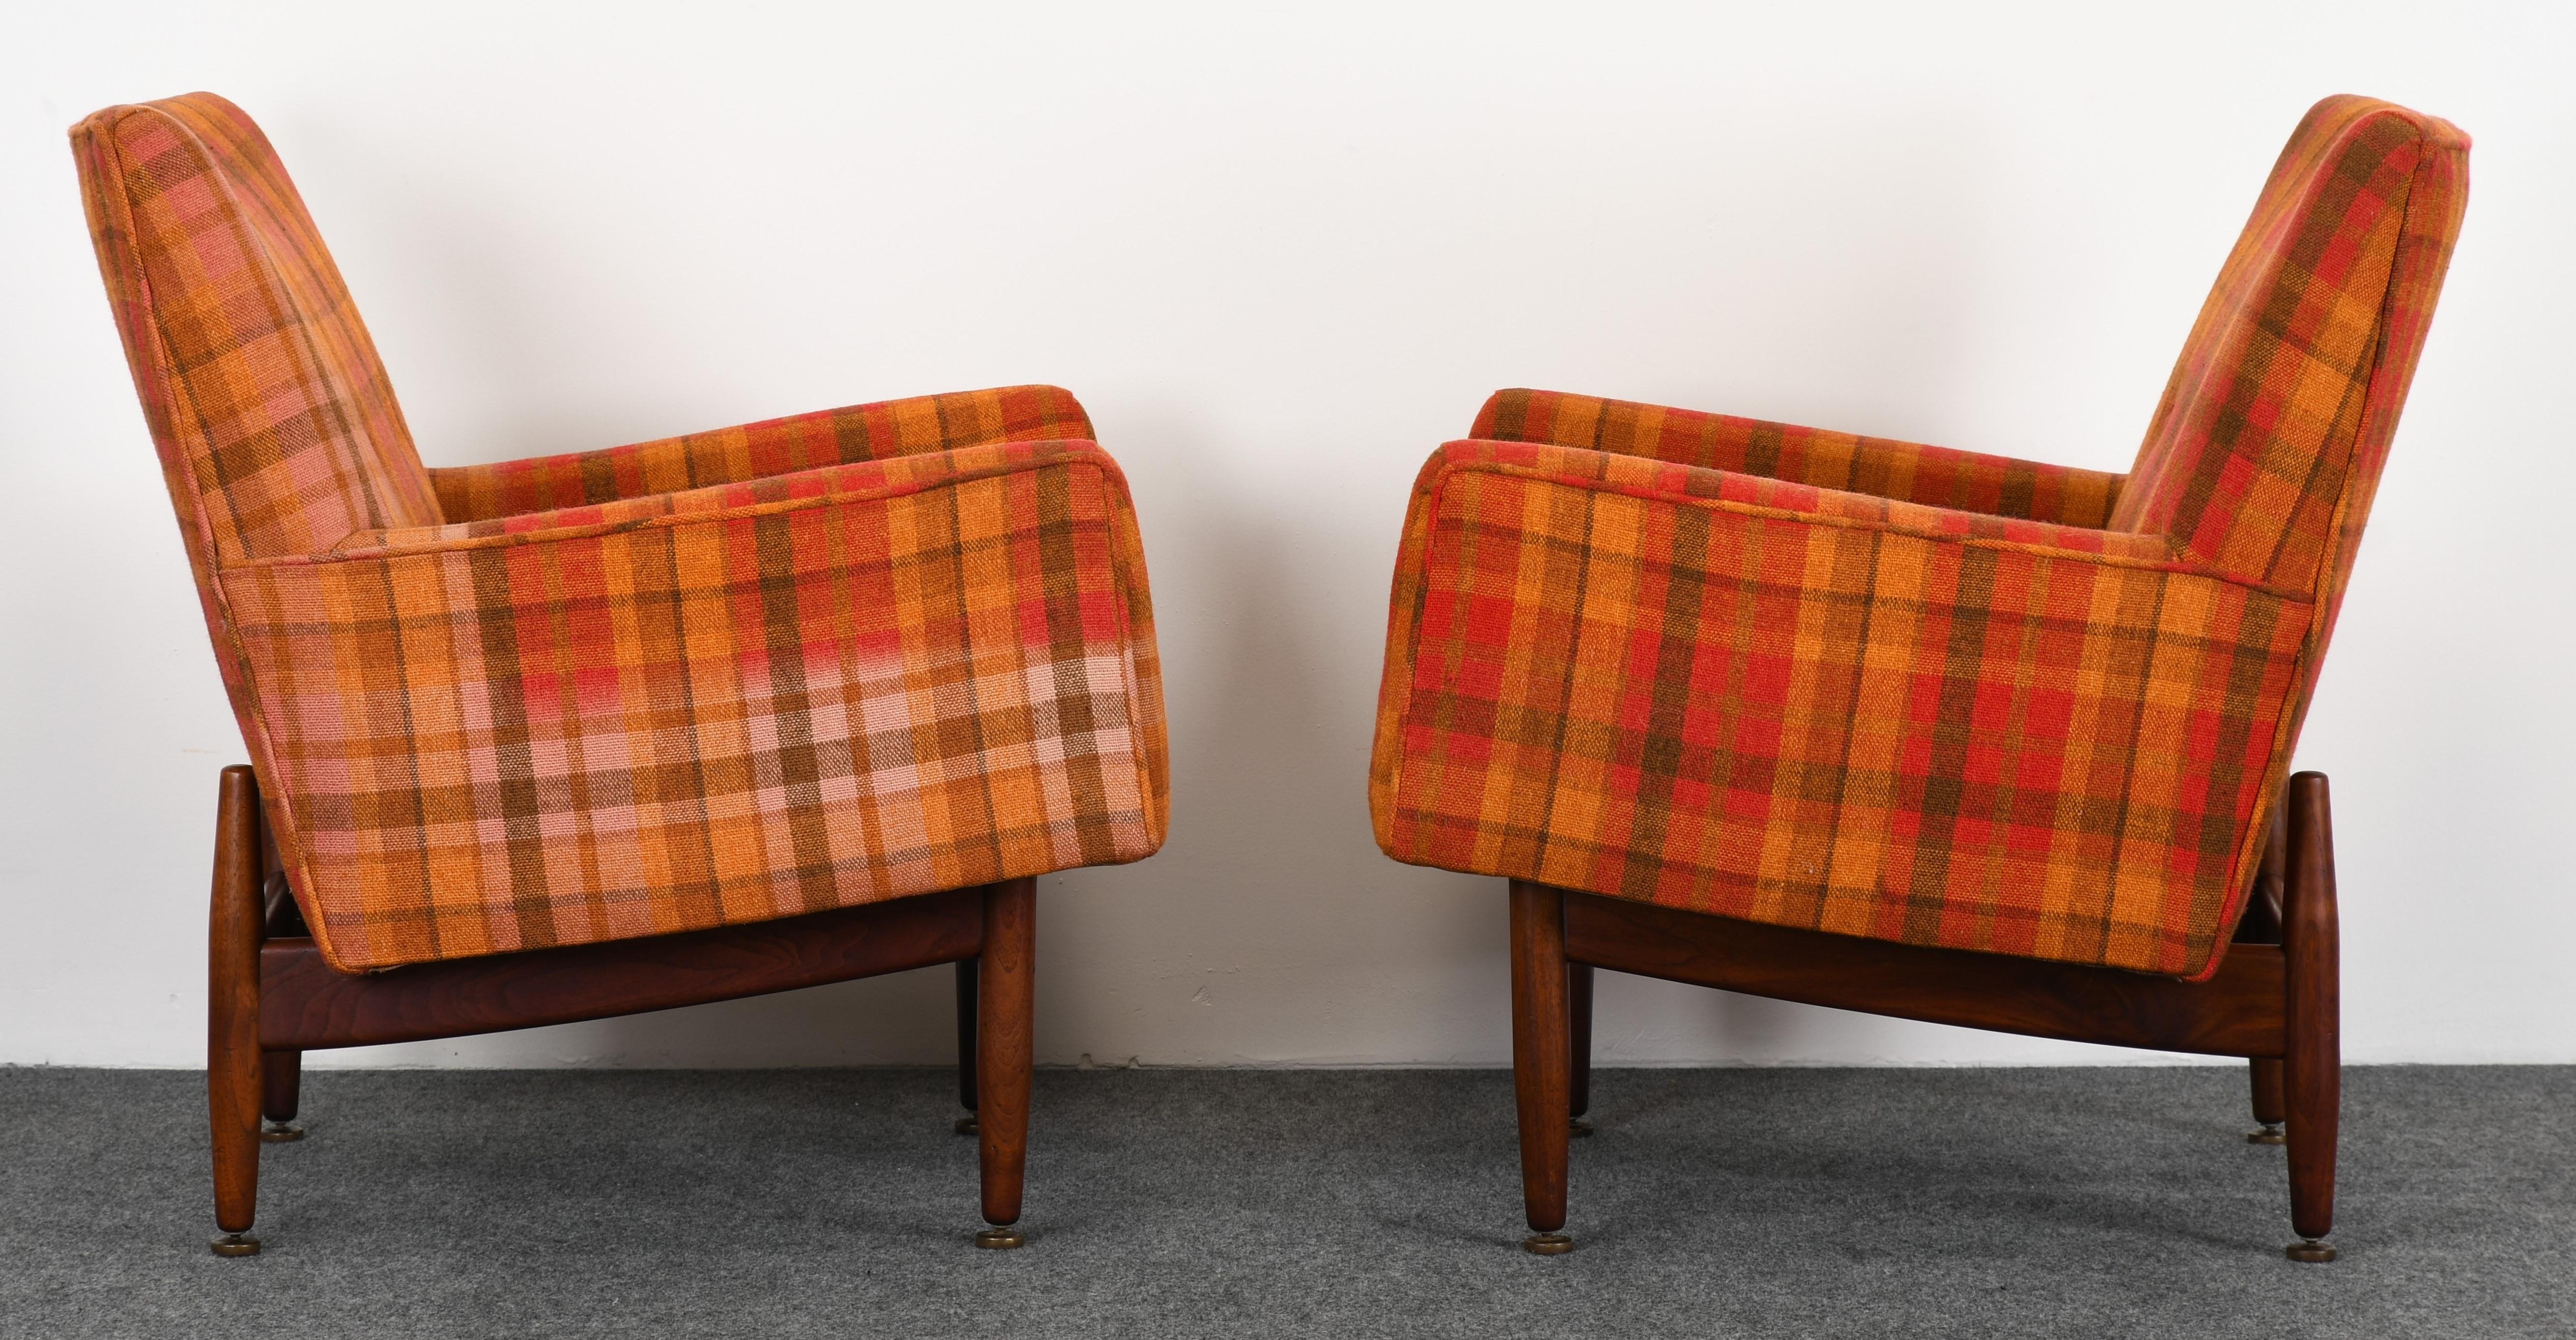 A modernist pair of Jens Risom walnut lounge chairs. A rare model produced in 1953, stamped underside. Structurally sound, new upholstery recommended. 

Dimensions: 30